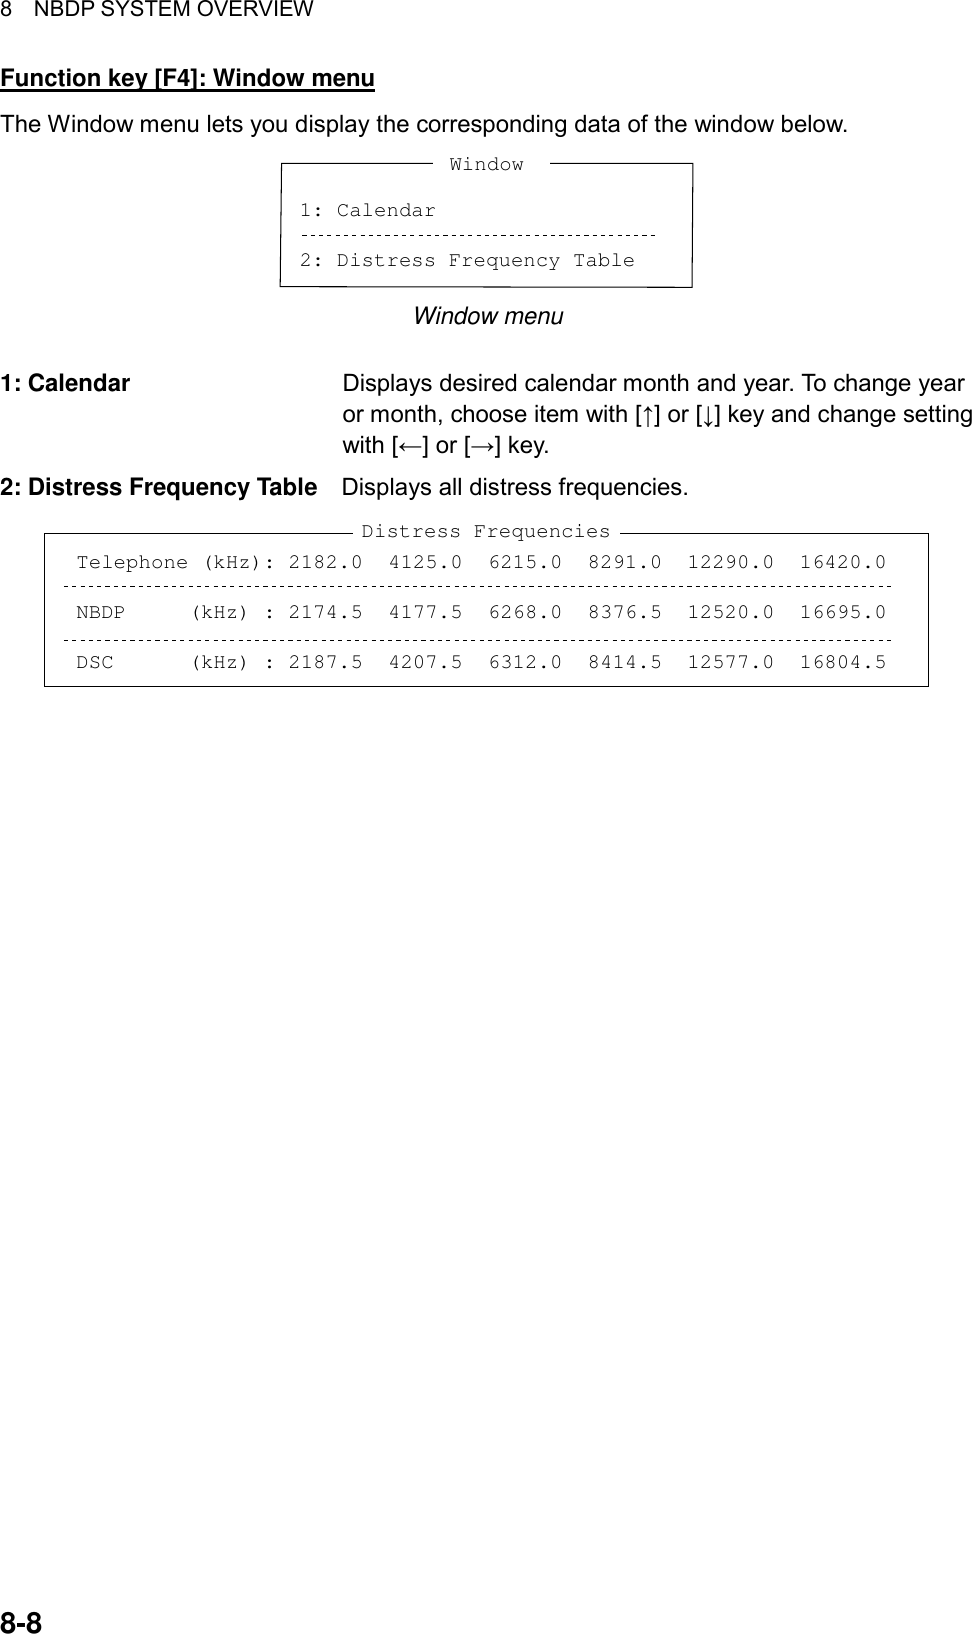 8  NBDP SYSTEM OVERVIEW  8-8 Function key [F4]: Window menu The Window menu lets you display the corresponding data of the window below. 1: Calendar2: Distress Frequency Table Window Window menu  1: Calendar  Displays desired calendar month and year. To change year or month, choose item with [↑] or [↓] key and change setting with [←] or [→] key. 2: Distress Frequency Table  Displays all distress frequencies. Distress FrequenciesTelephone (kHz): 2182.0  4125.0  6215.0  8291.0  12290.0  16420.0NBDP     (kHz) : 2174.5  4177.5  6268.0  8376.5  12520.0  16695.0DSC      (kHz) : 2187.5  4207.5  6312.0  8414.5  12577.0  16804.5   